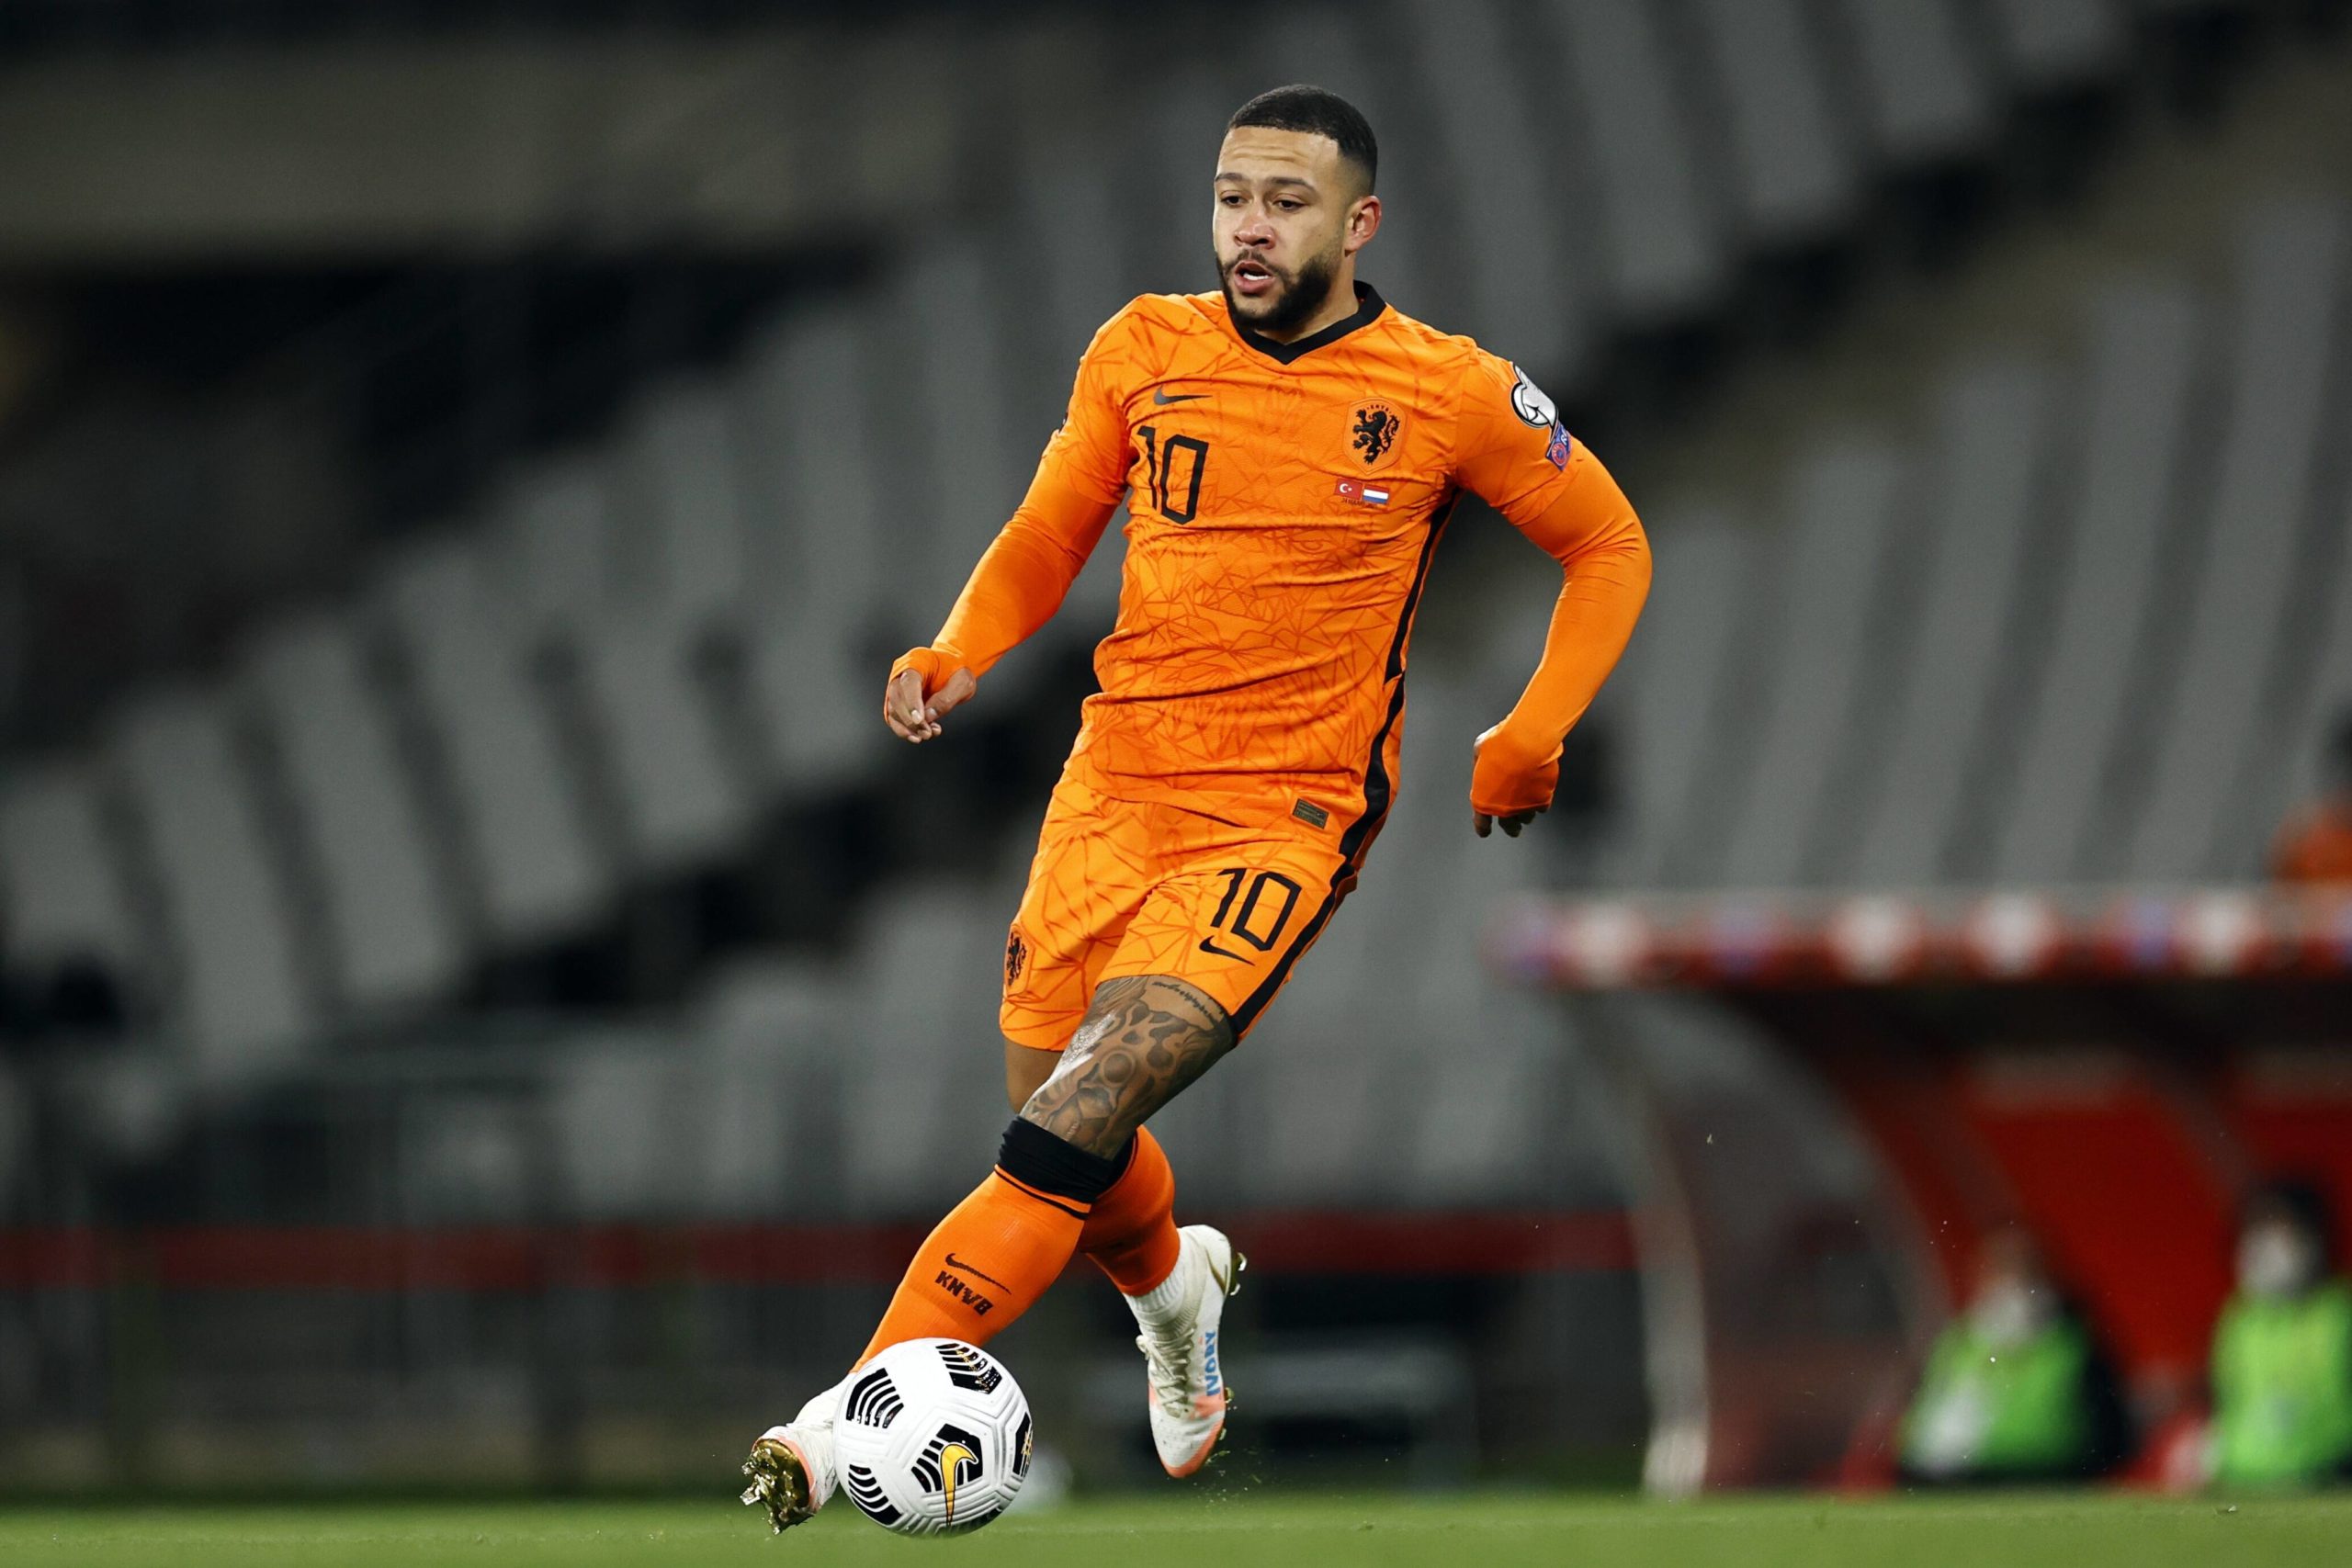 Update on Barcelona's pursuit of Depay who is seen in the picture